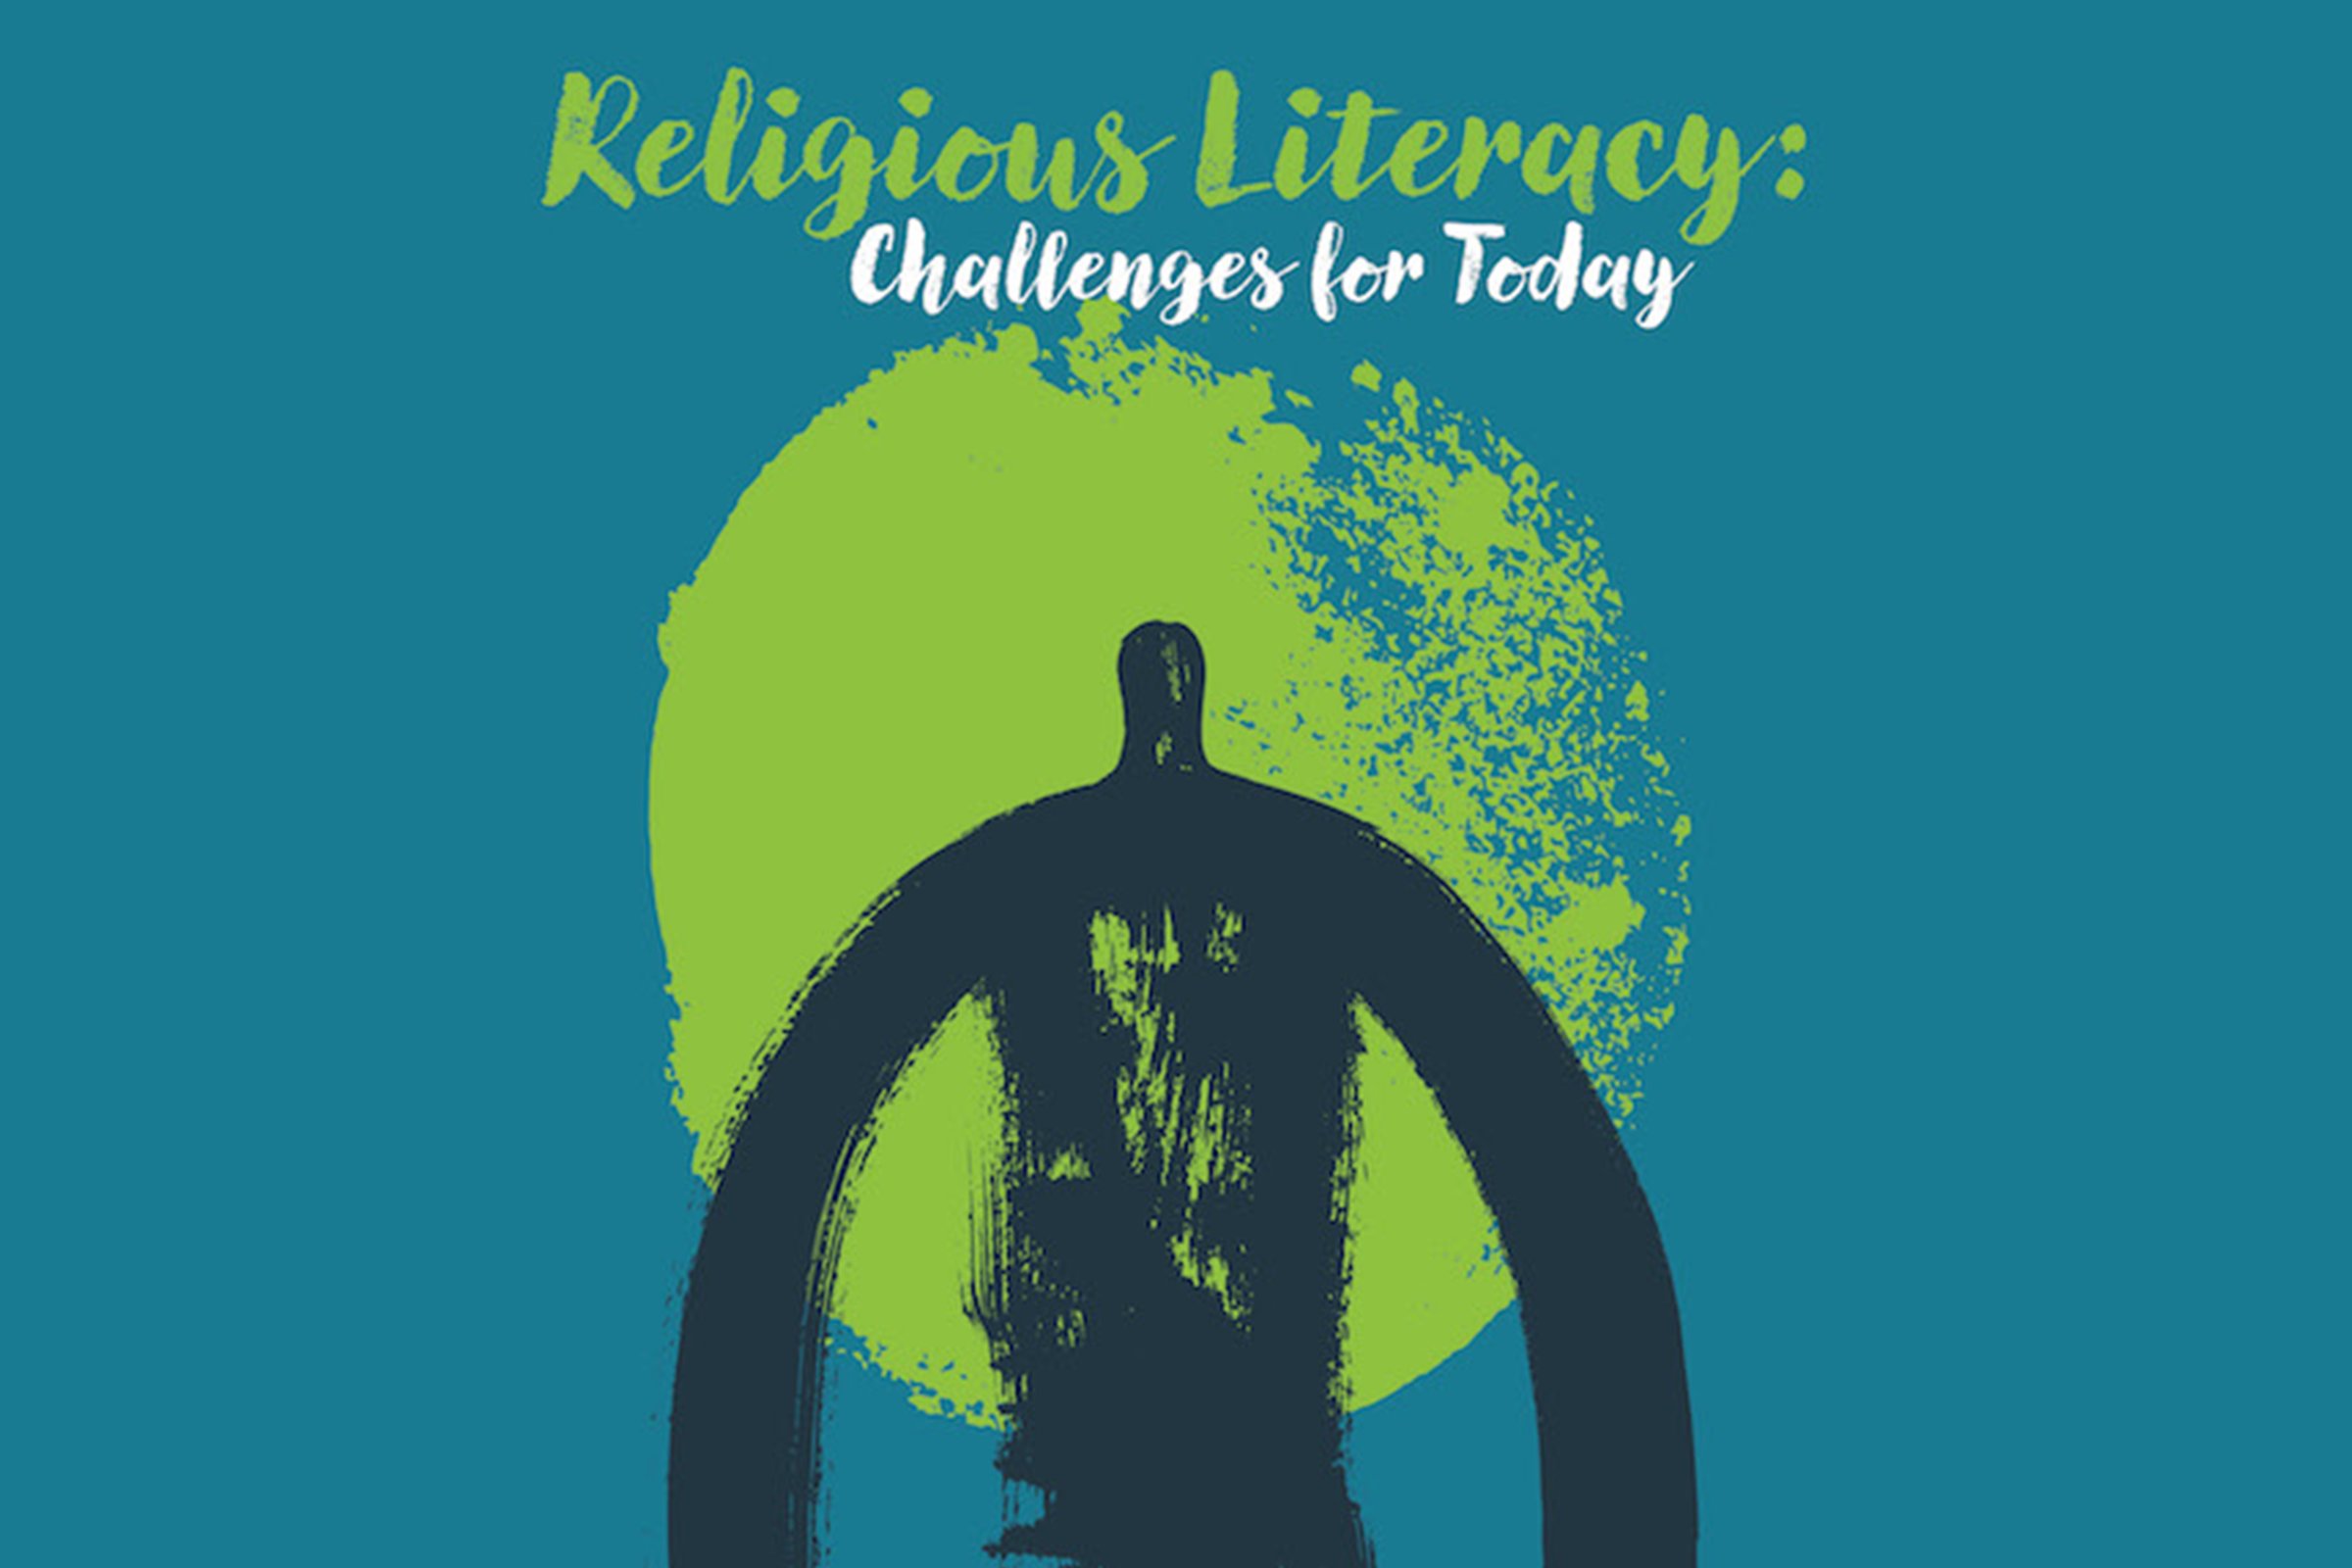 Religious Literacy: Challenges for Today